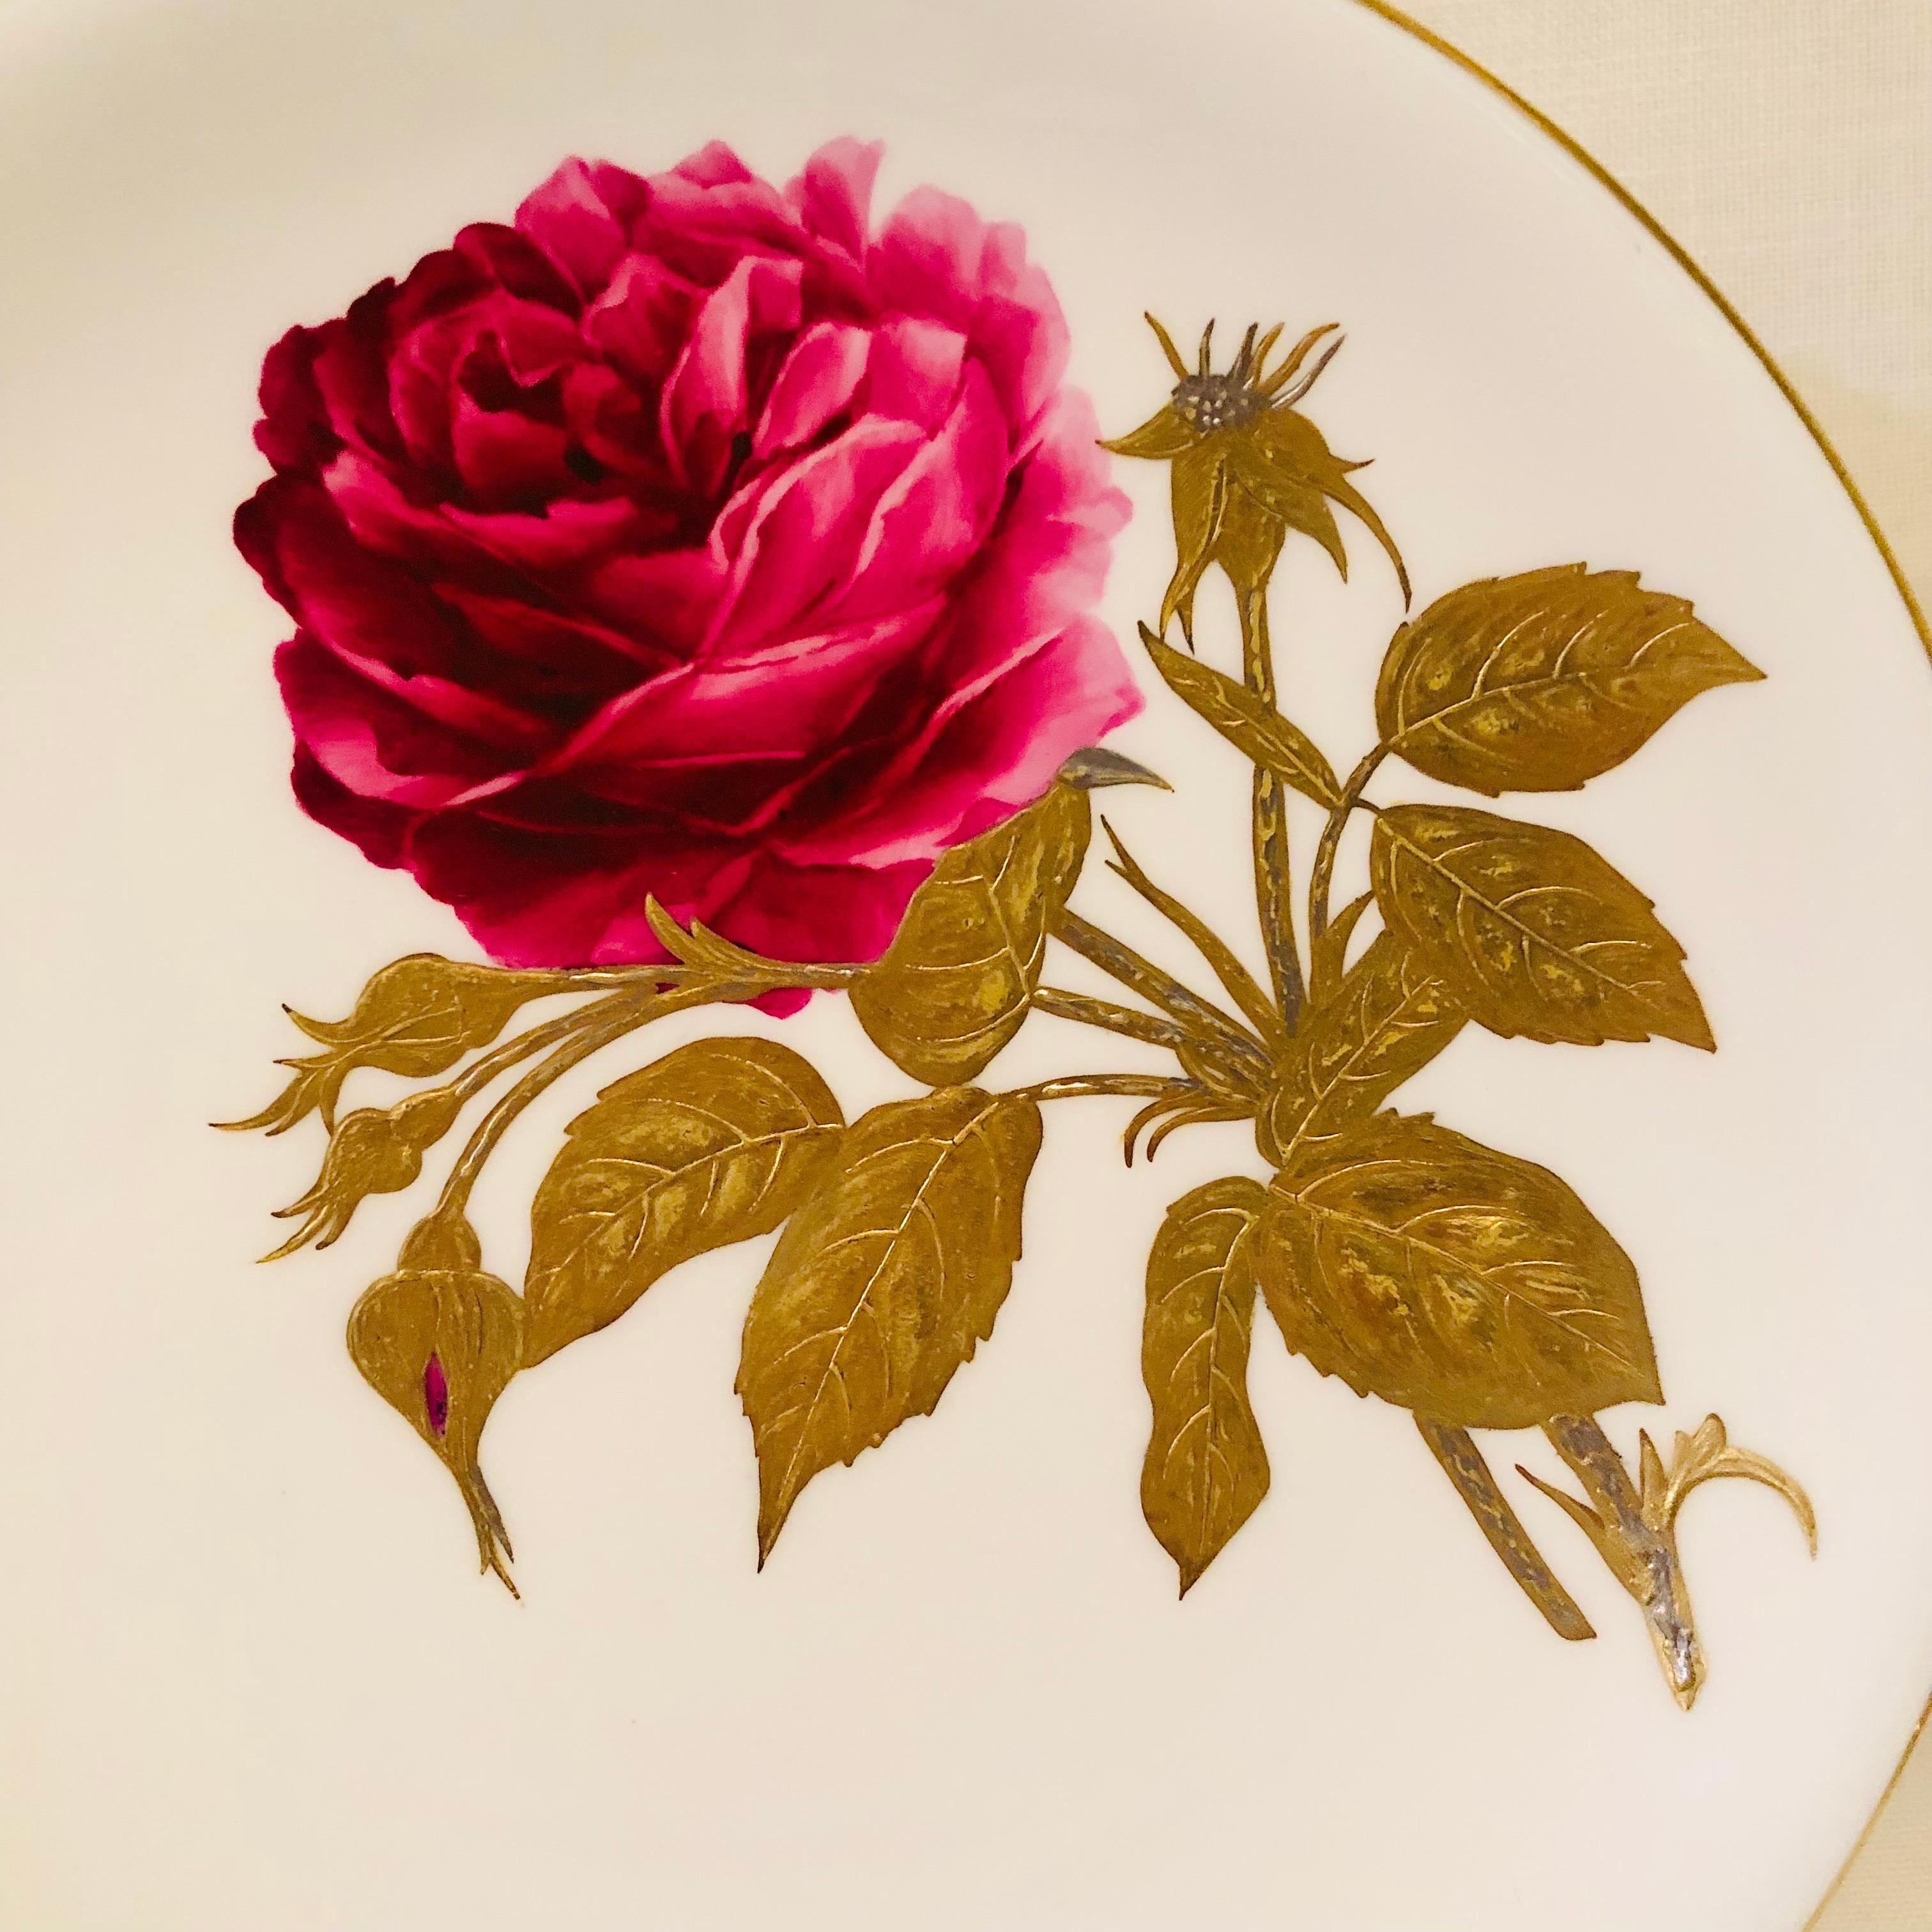 Minton Plates Each Painted With a Different Rose With Gold and Platinum Accents 5